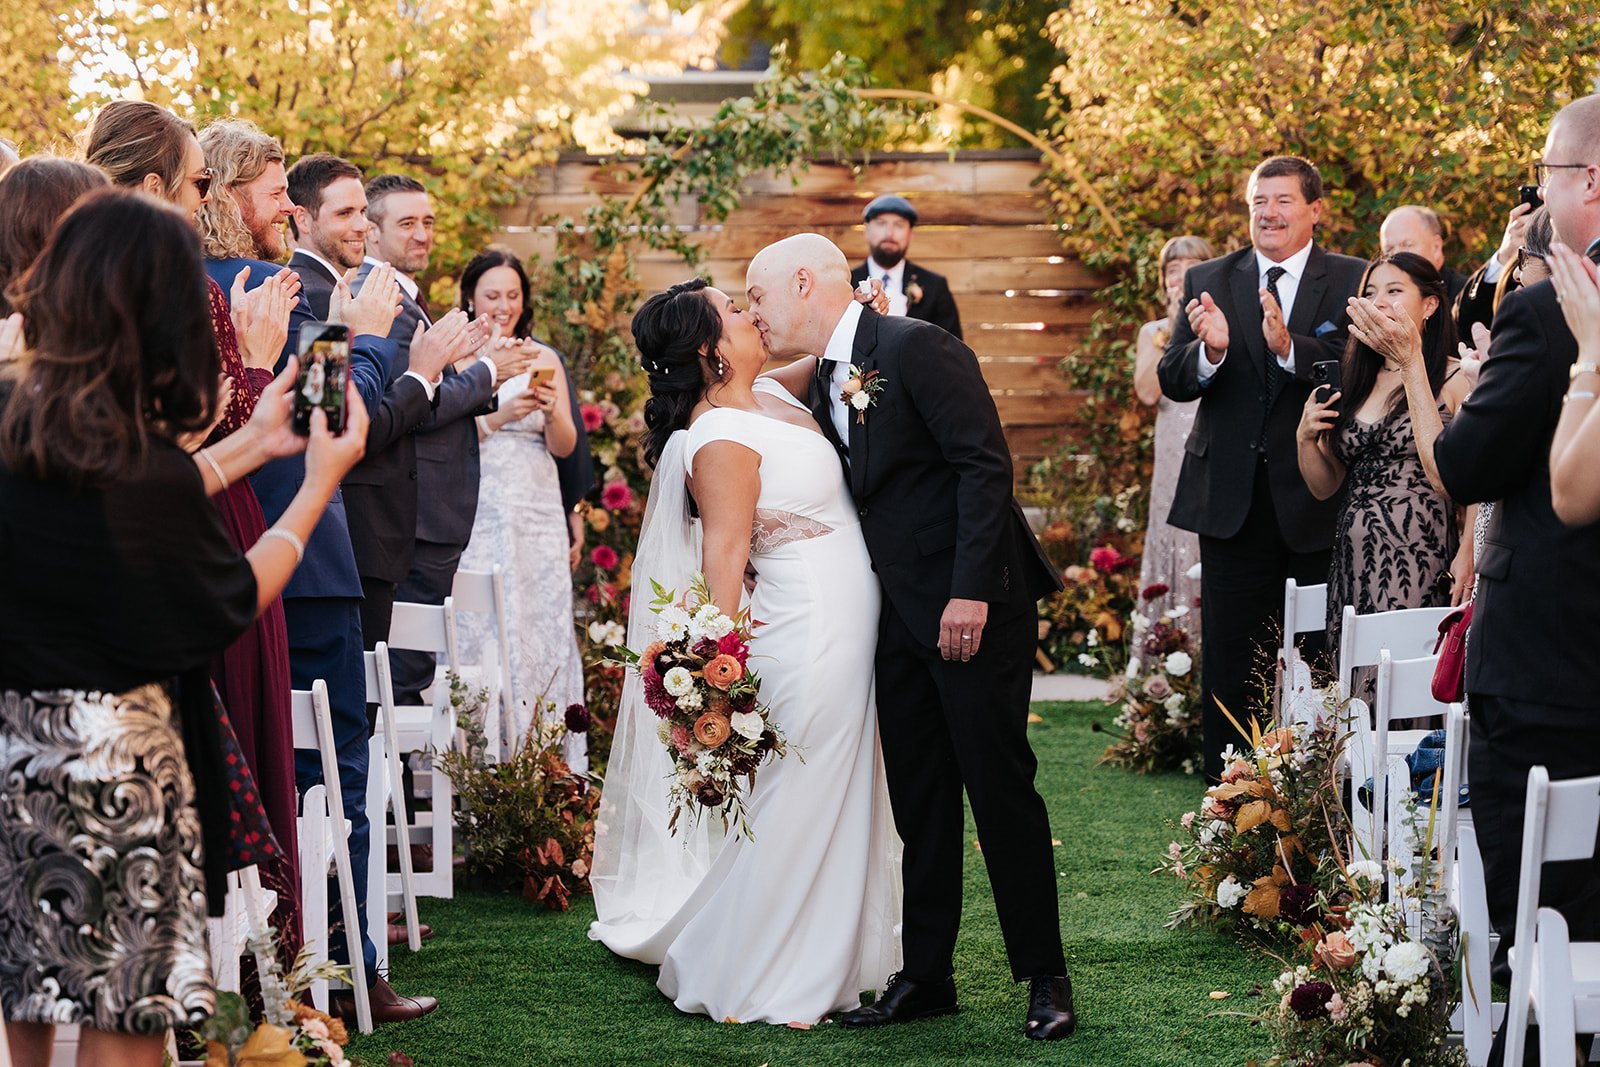 Bride and groom kissing after wedding ceremony in courtyard at the St Vrain wedding venue, Colorado
